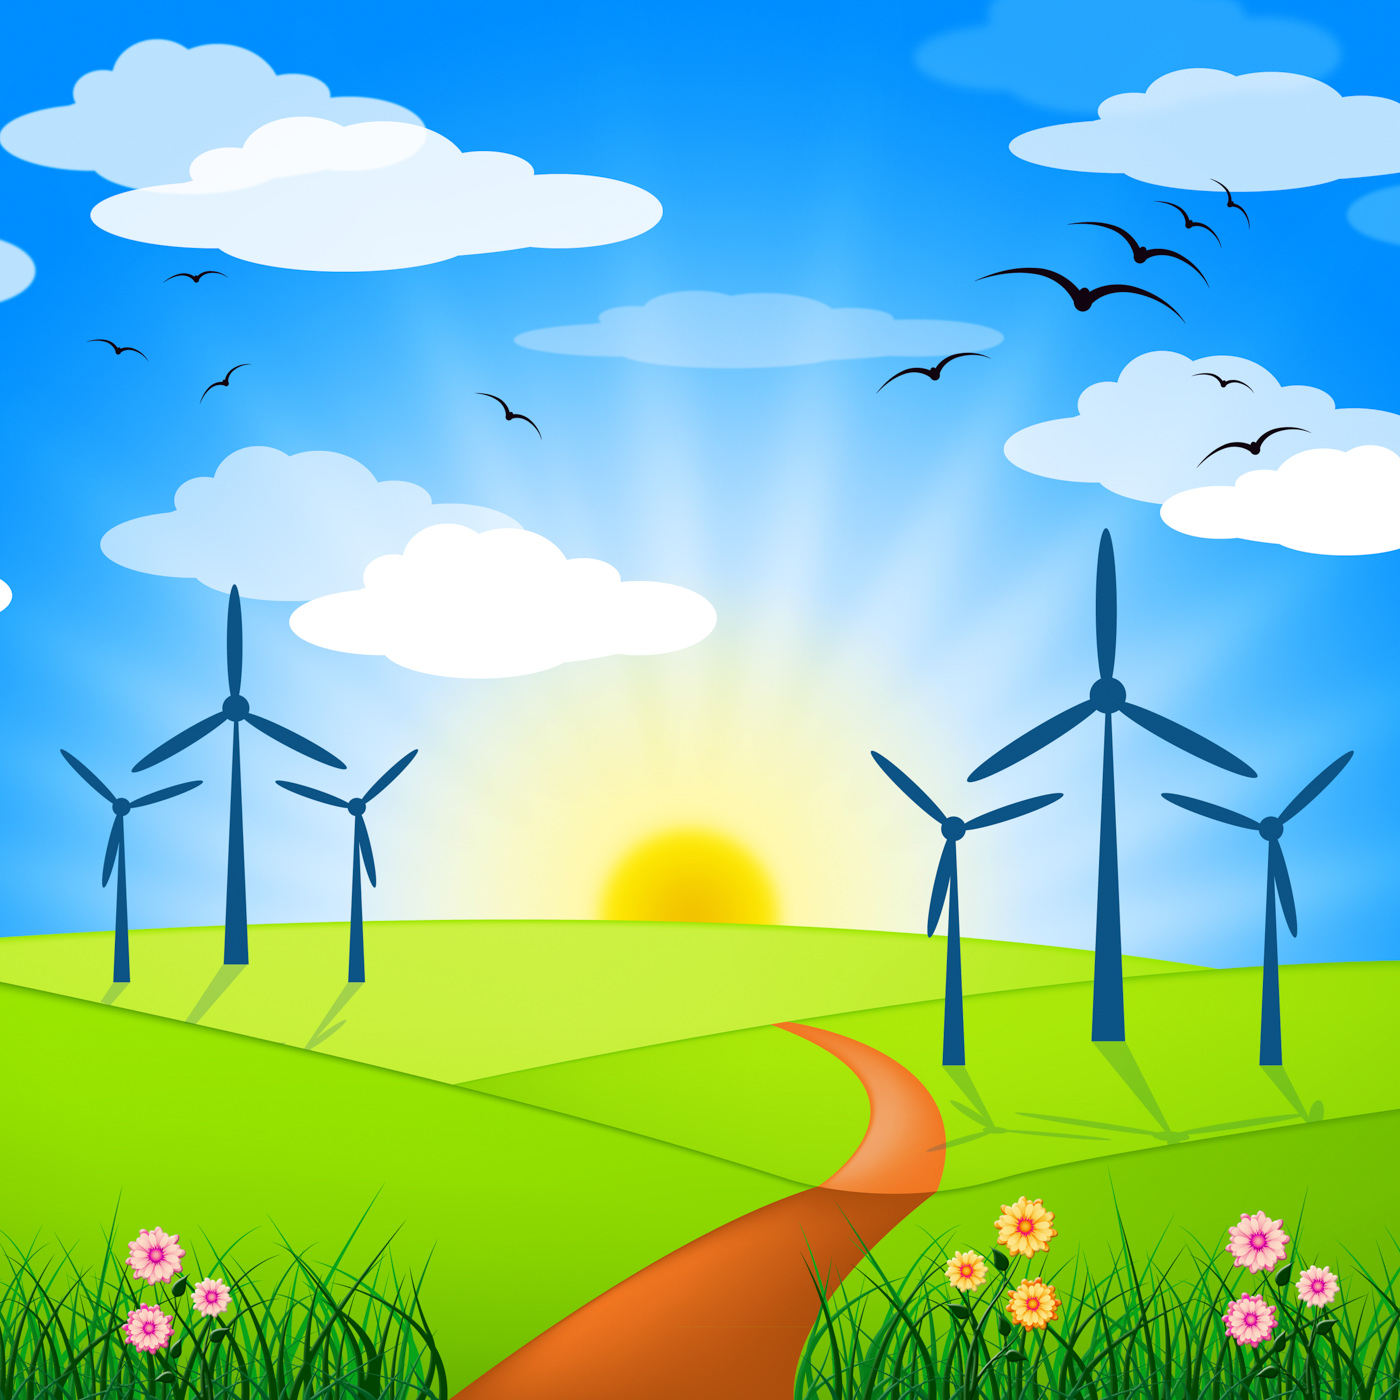 Wind power represents turbine energy and electricity photo